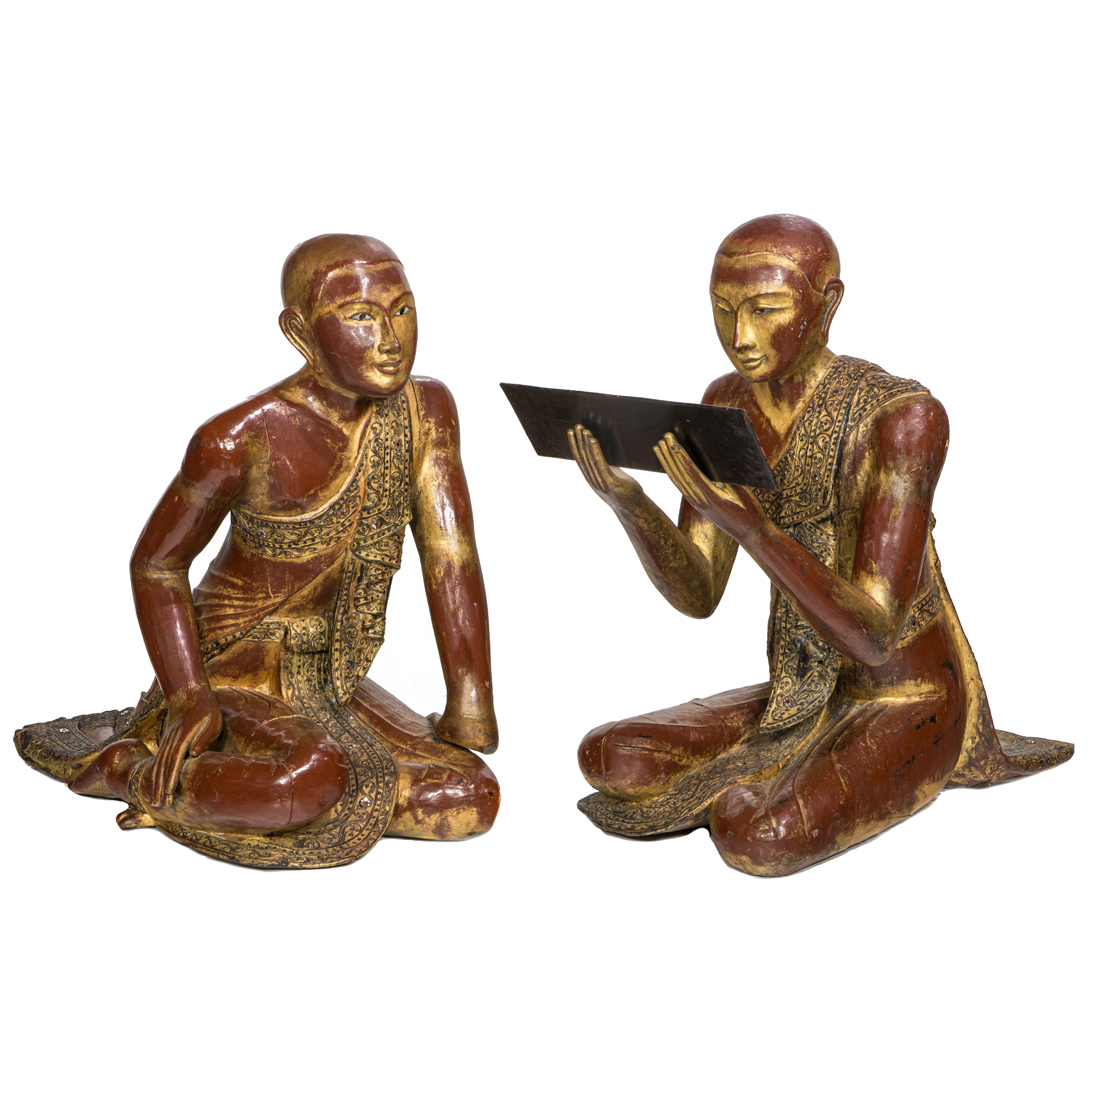 PAIR OF BURMESE GILT LACQUERED